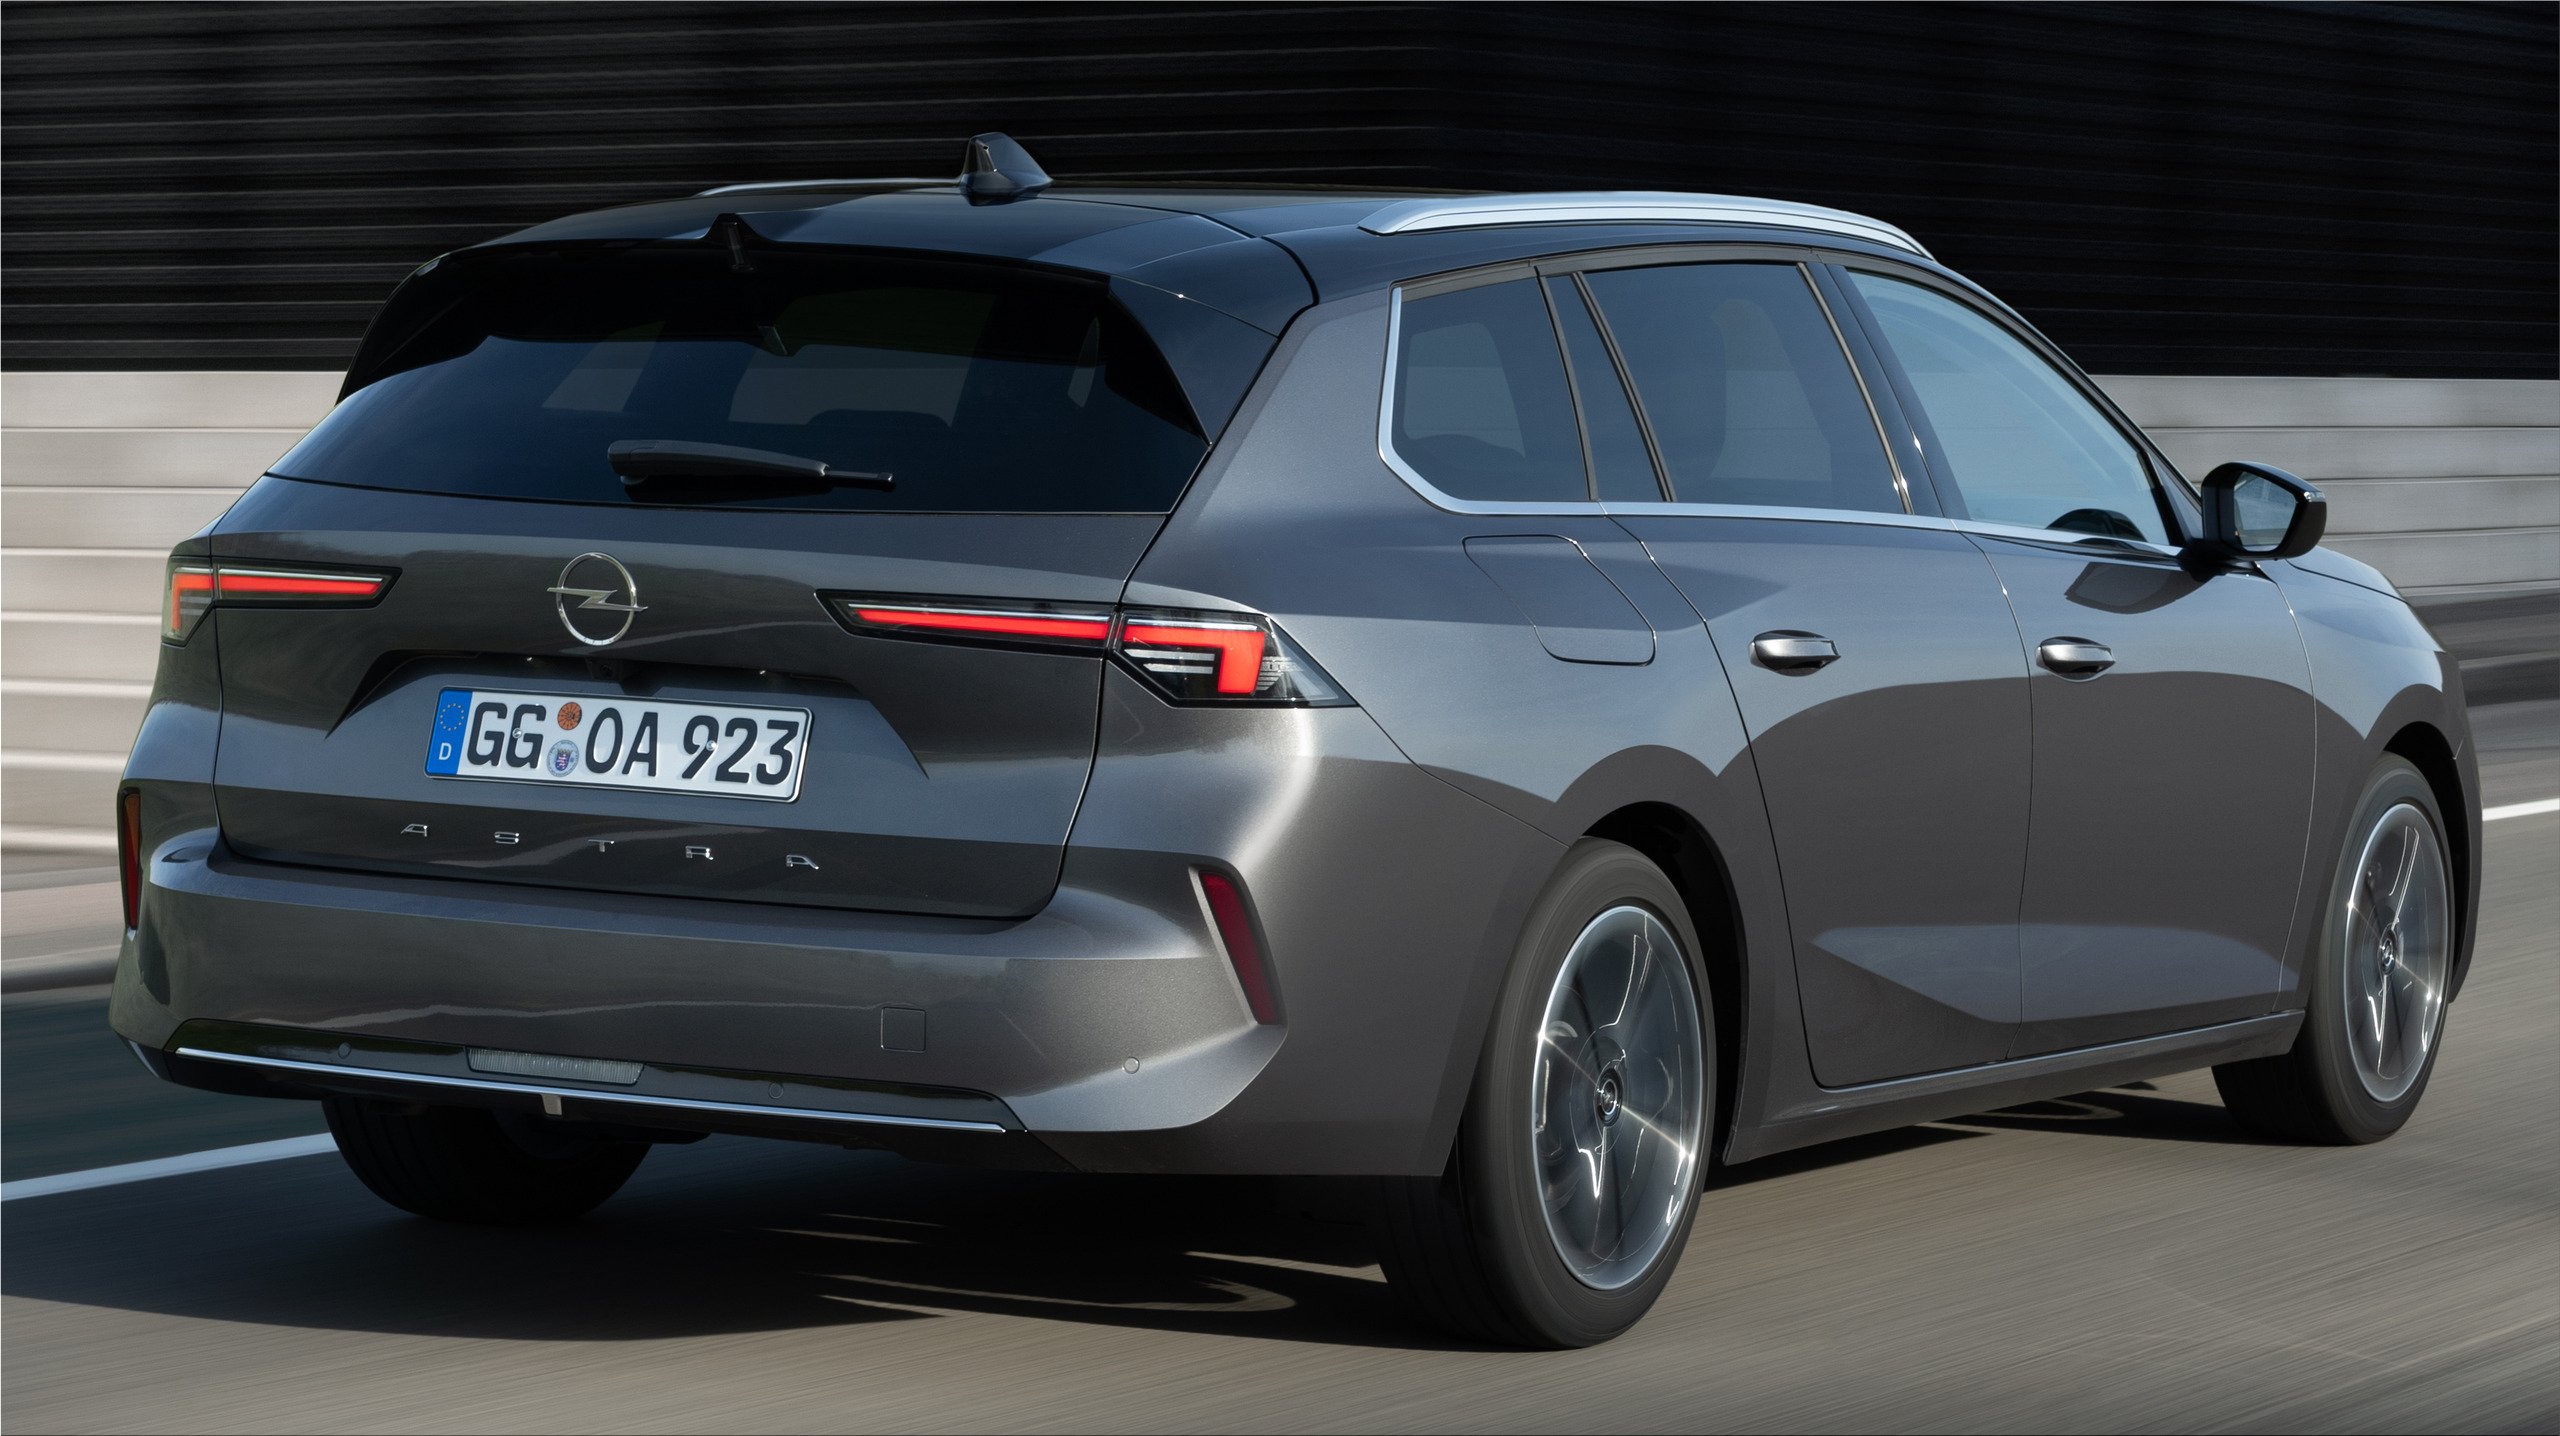 The new Opel Astra Sports Tourer is a chic family car